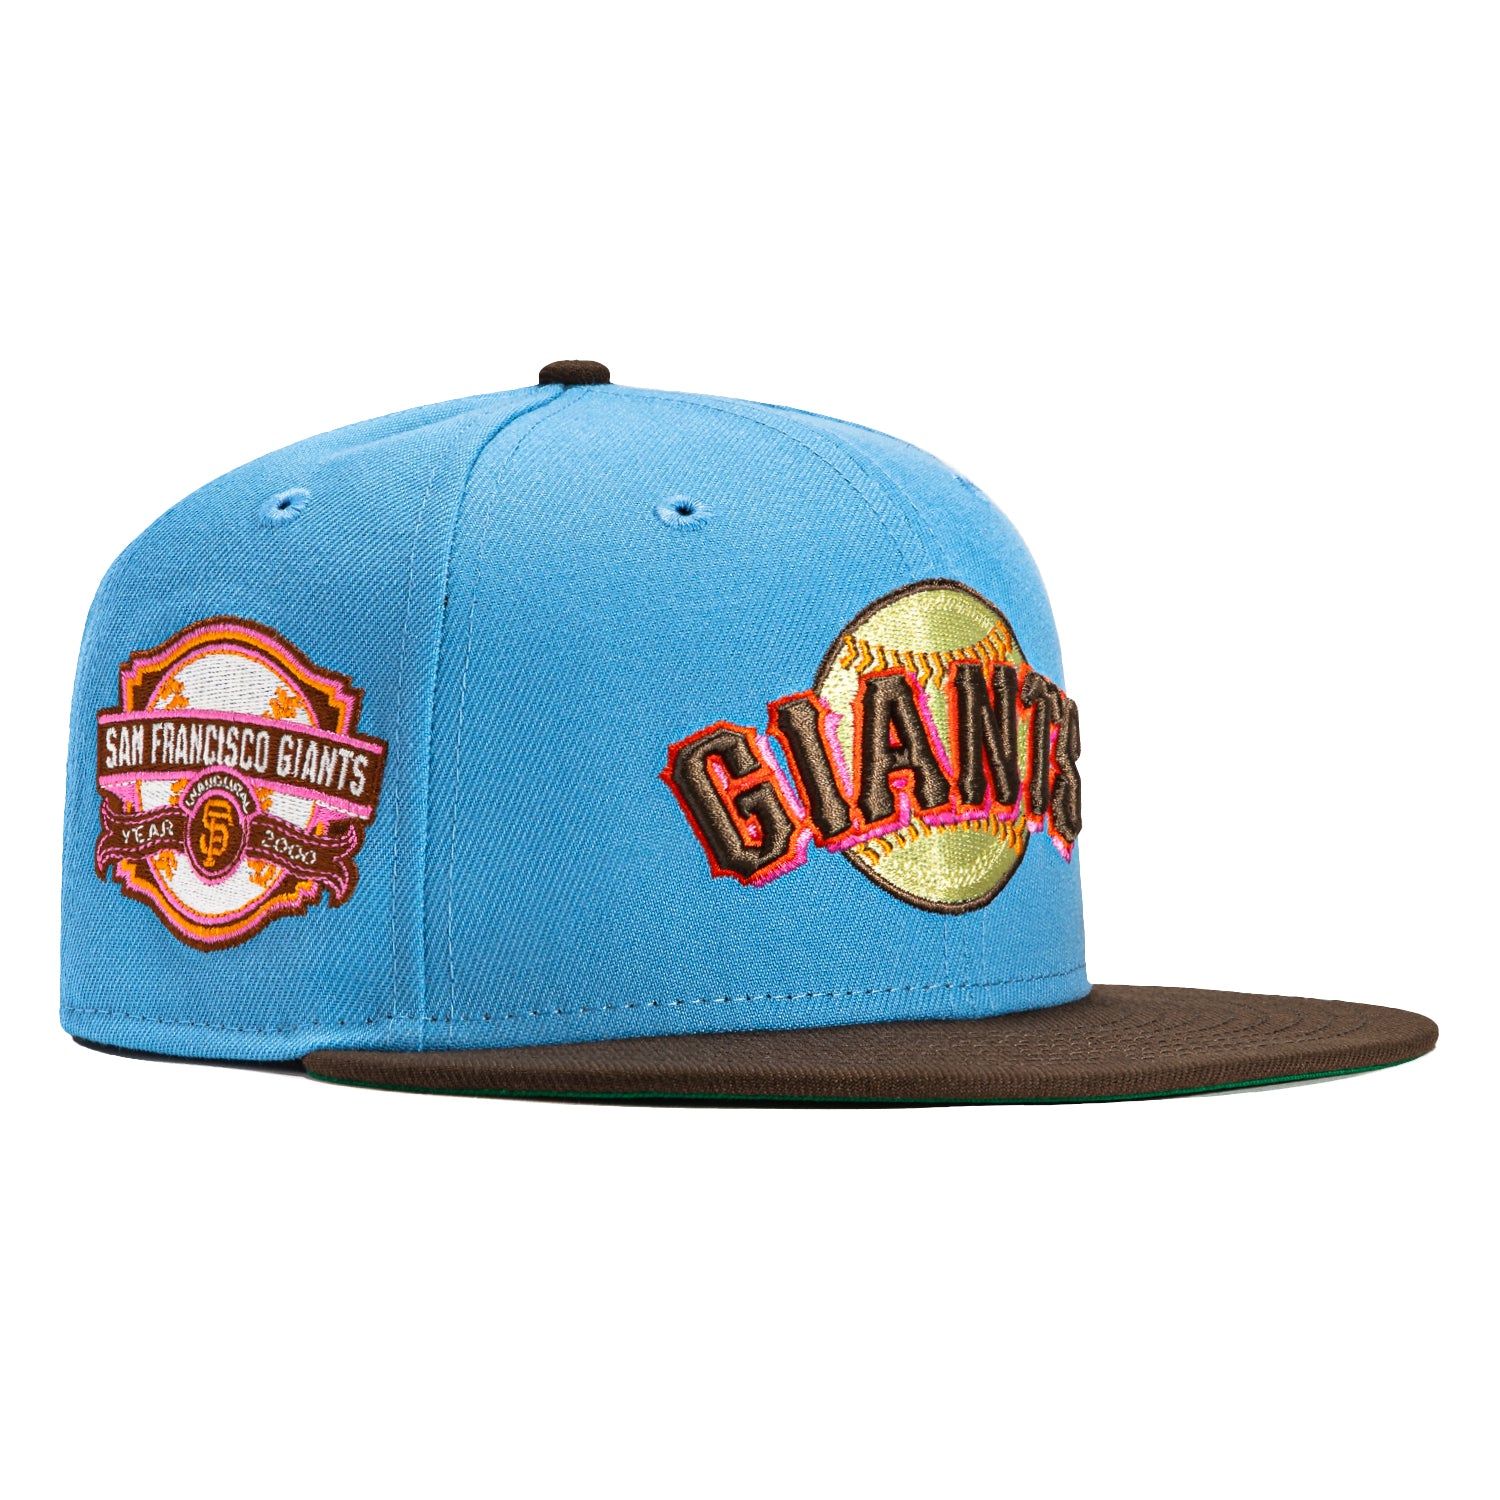 New Era 59Fifty San Francisco Giants Inaugural Patch Hat - Light